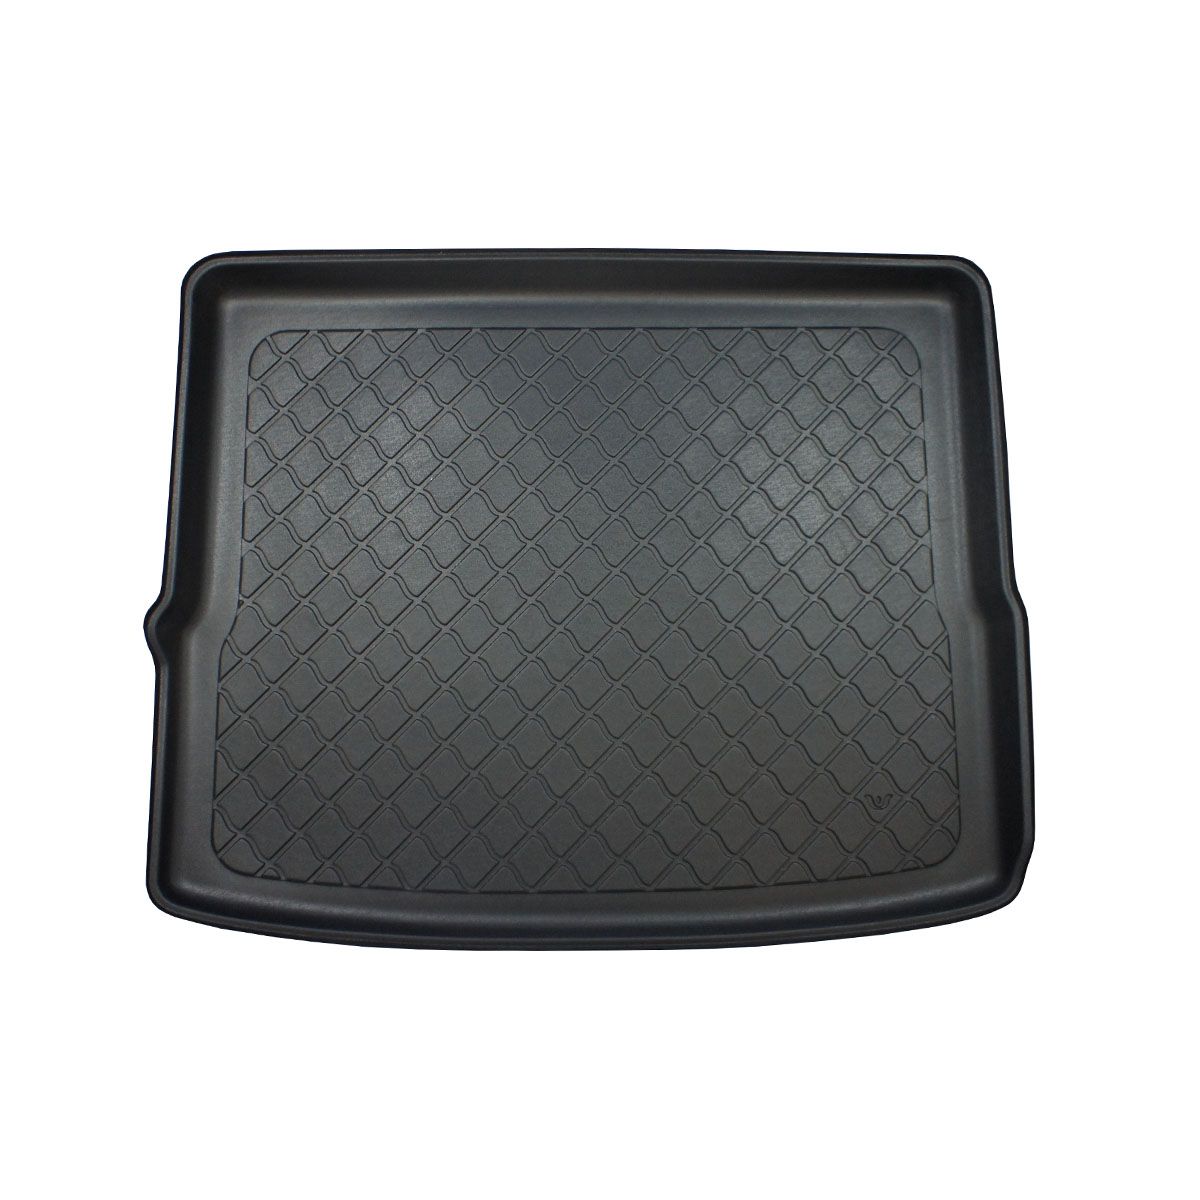 BMW X1 (2015 onwards) Moulded Boot Mat product image